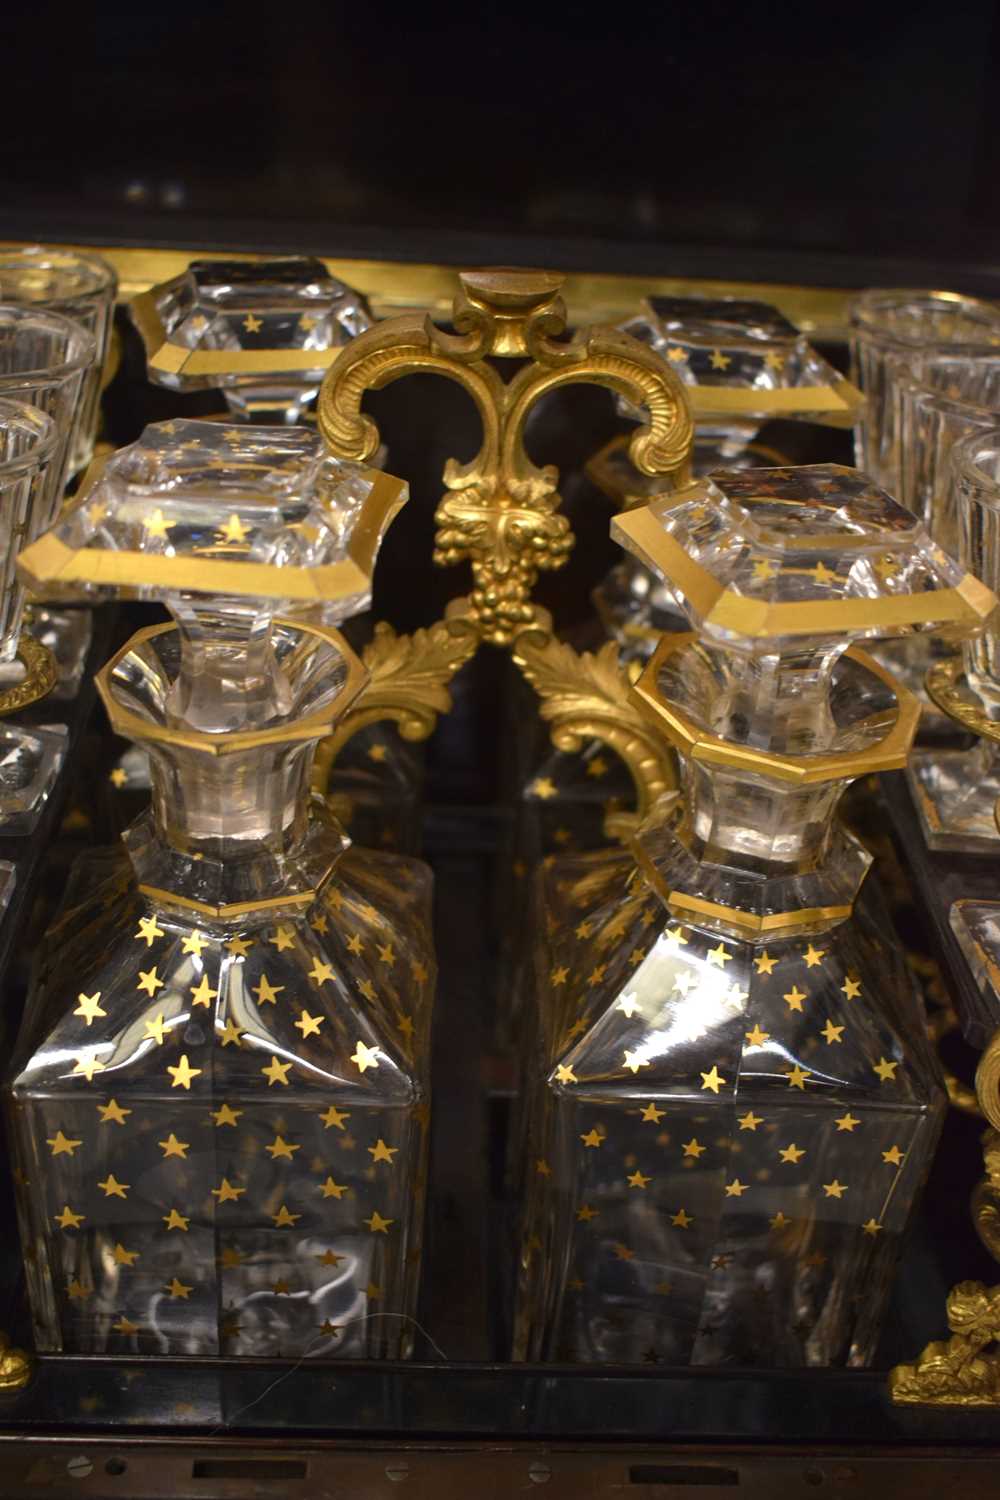 A LARGE 18TH/19TH CENTURY FRENCH NAPOLEON III BOULLE TORTOISESHELL TANTALUS DECANTER SET the case - Image 28 of 36